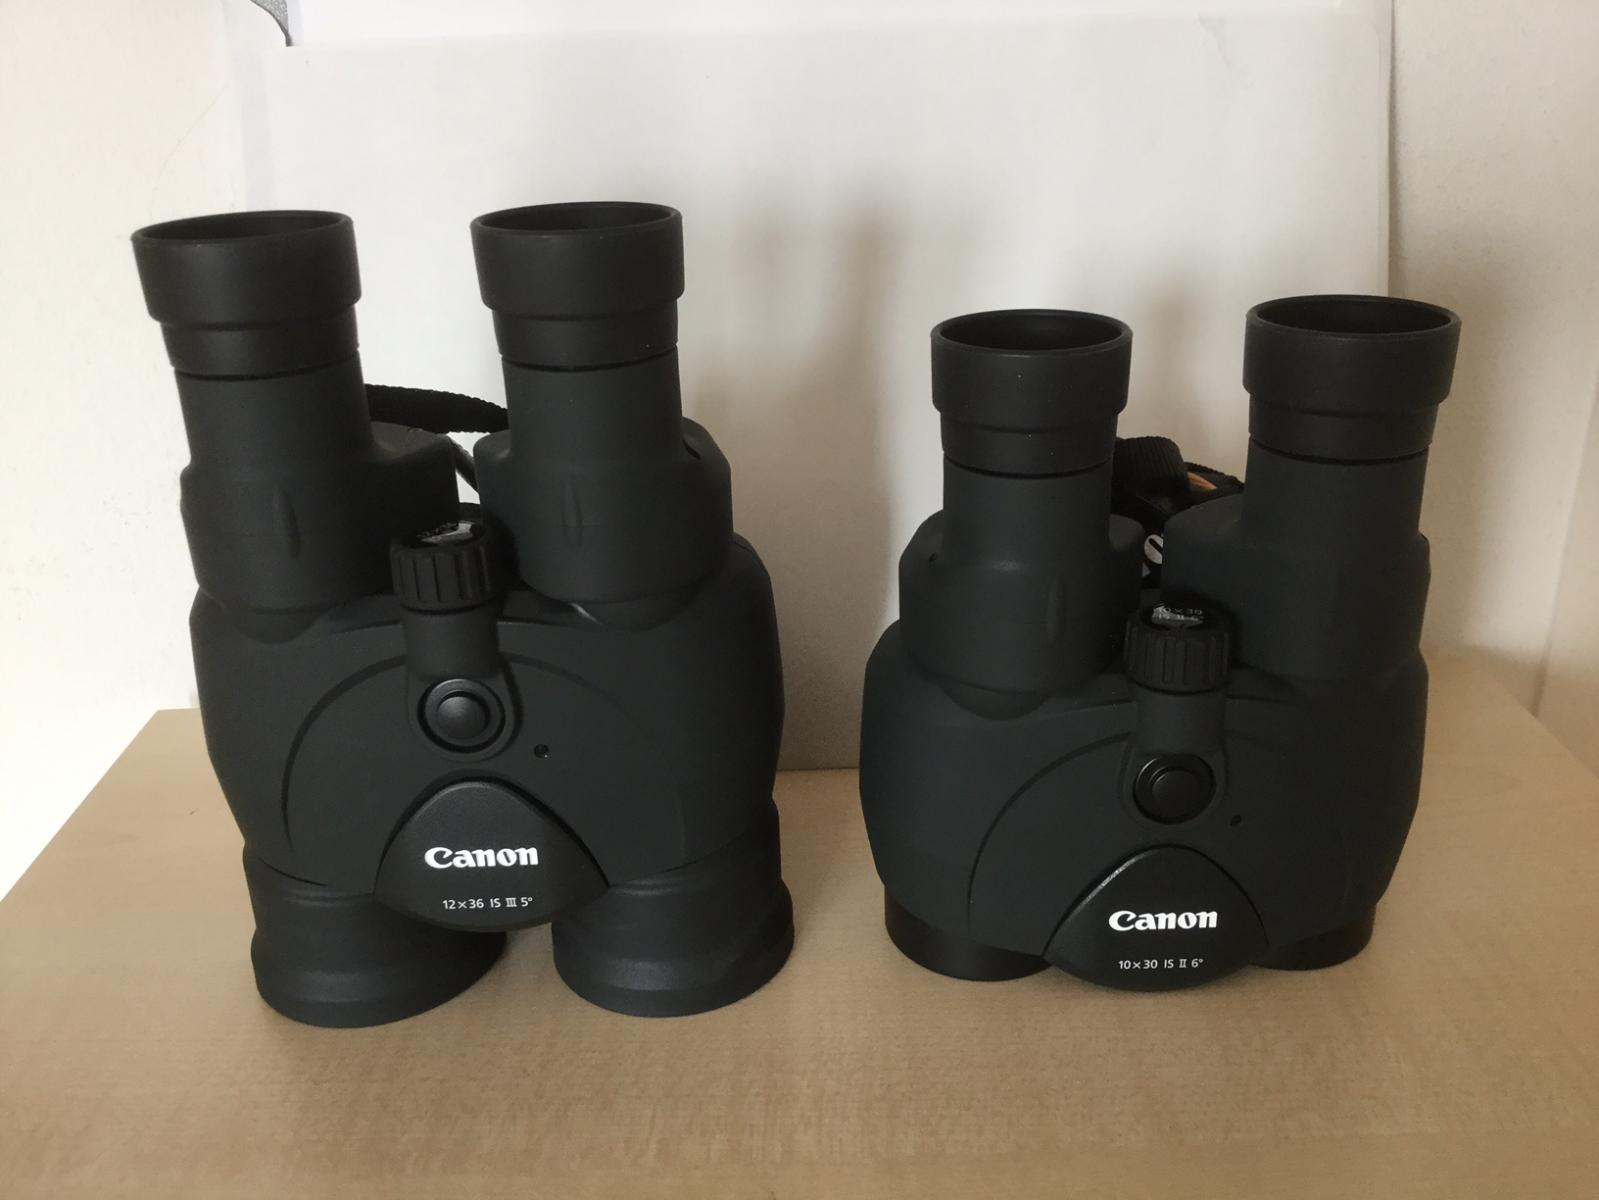 Anyone use a Canon 10x30 IS for Astro? - Binoculars - Cloudy Nights